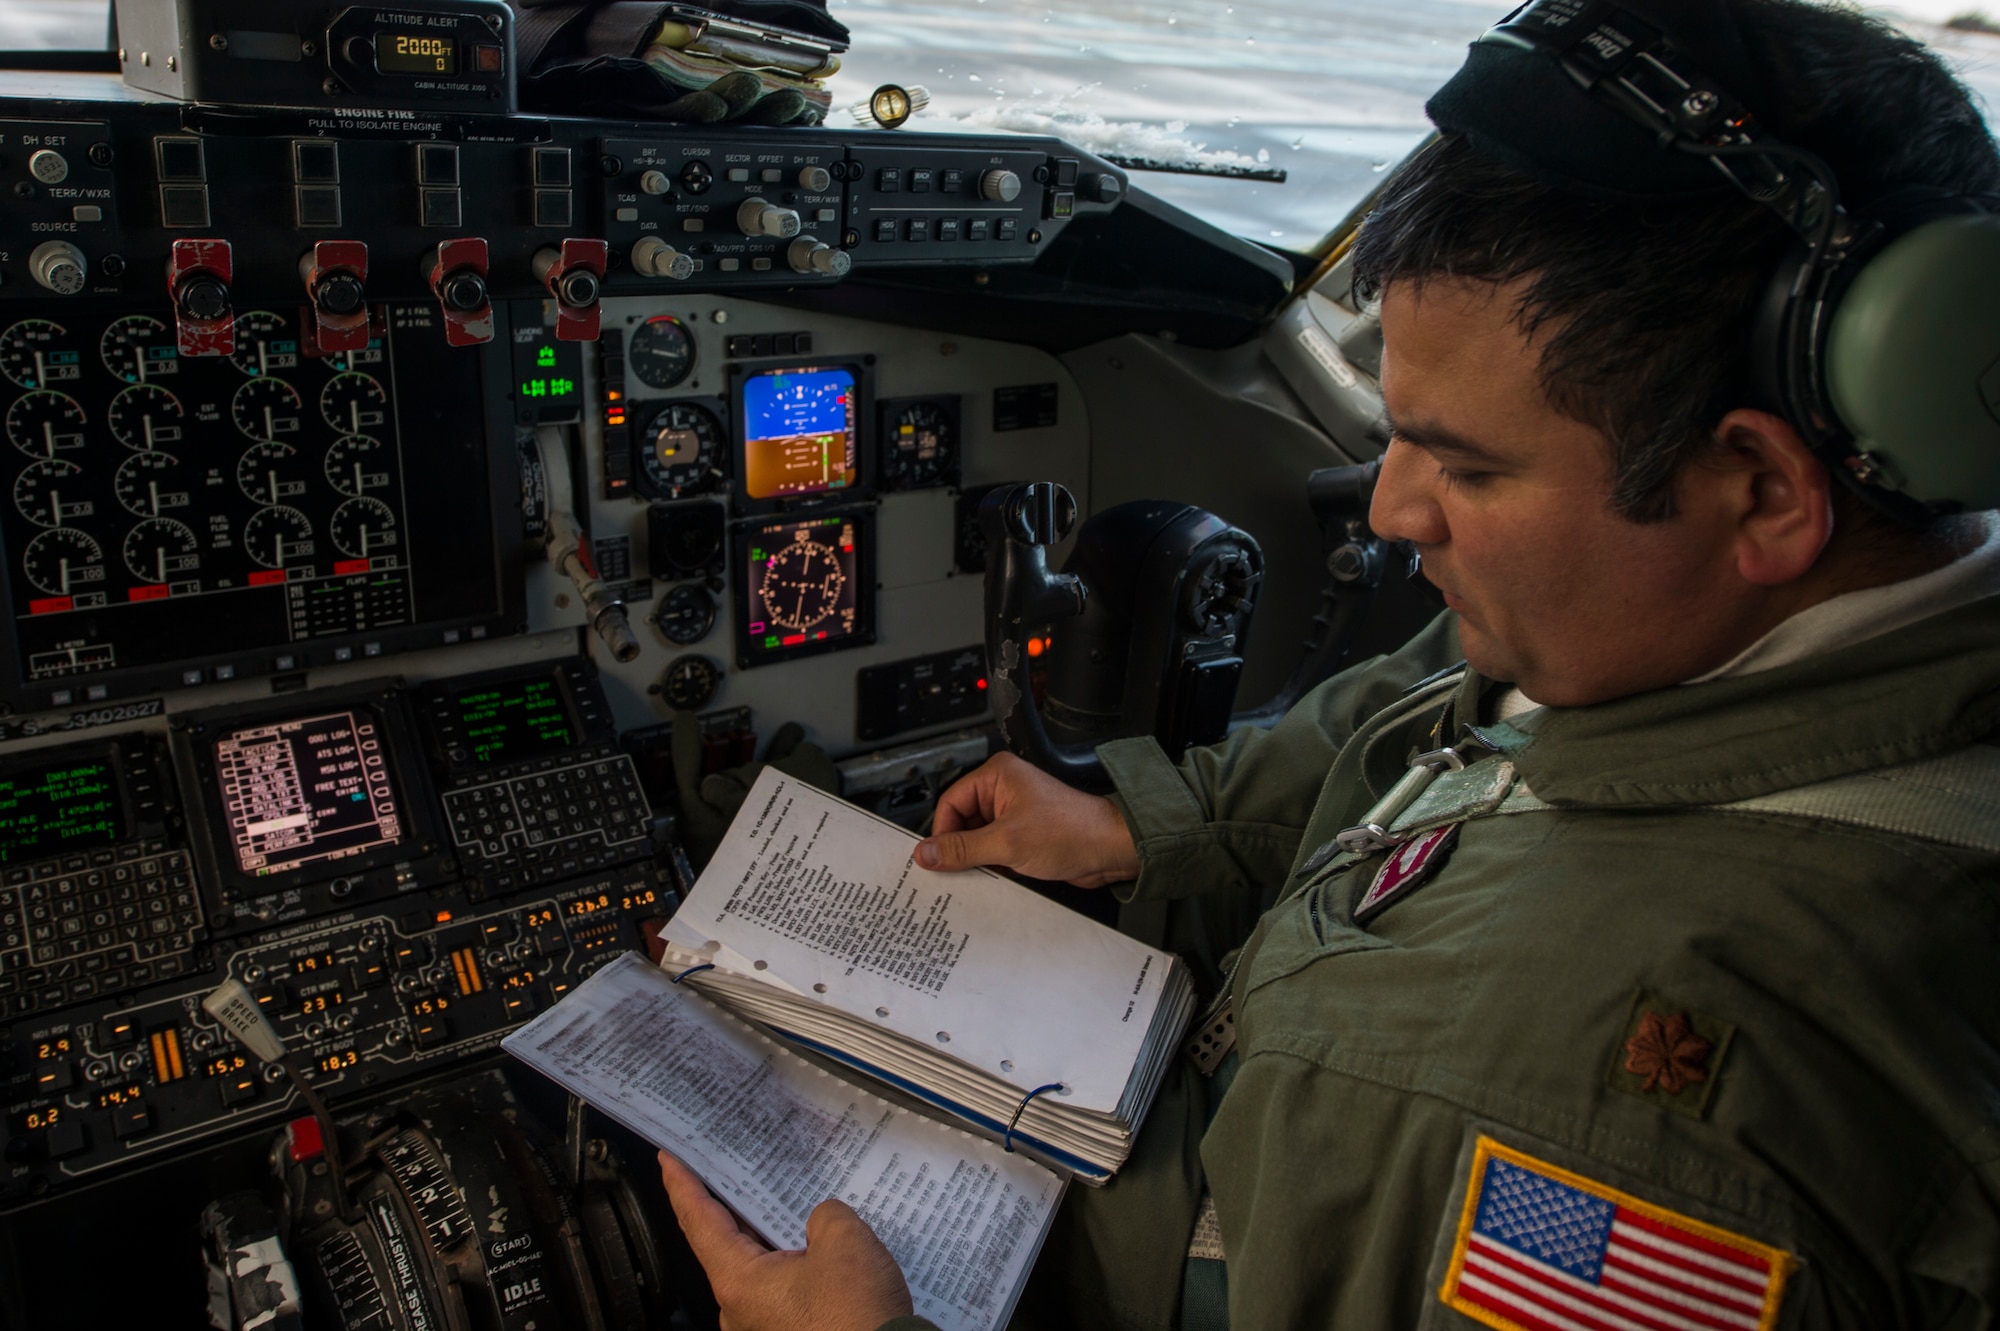 U.S. Maj. Jonathan Flores, 384th Air Refueling Squadron pilot, reads over pre-flight checklist for a KC-135 Stratotanker prior to a sortie in support of Vigilant Shield 16 at 5 Wing Goose Bay, Canada, Oct. 19, 2015. From Oct. 15-26, 2015, approximately 700 members from the Canadian Armed Forces, the United States Air Force, the United States Navy, and the United States Air National Guard are deploying to Iqaluit, Nunavut, and 5 Wing Goose Bay, Newfoundland and Labrador, for Exercise Vigilant Shield 16. (U.S. Air Force photo by Tech. Sgt. Joshua J. Garcia/Released)